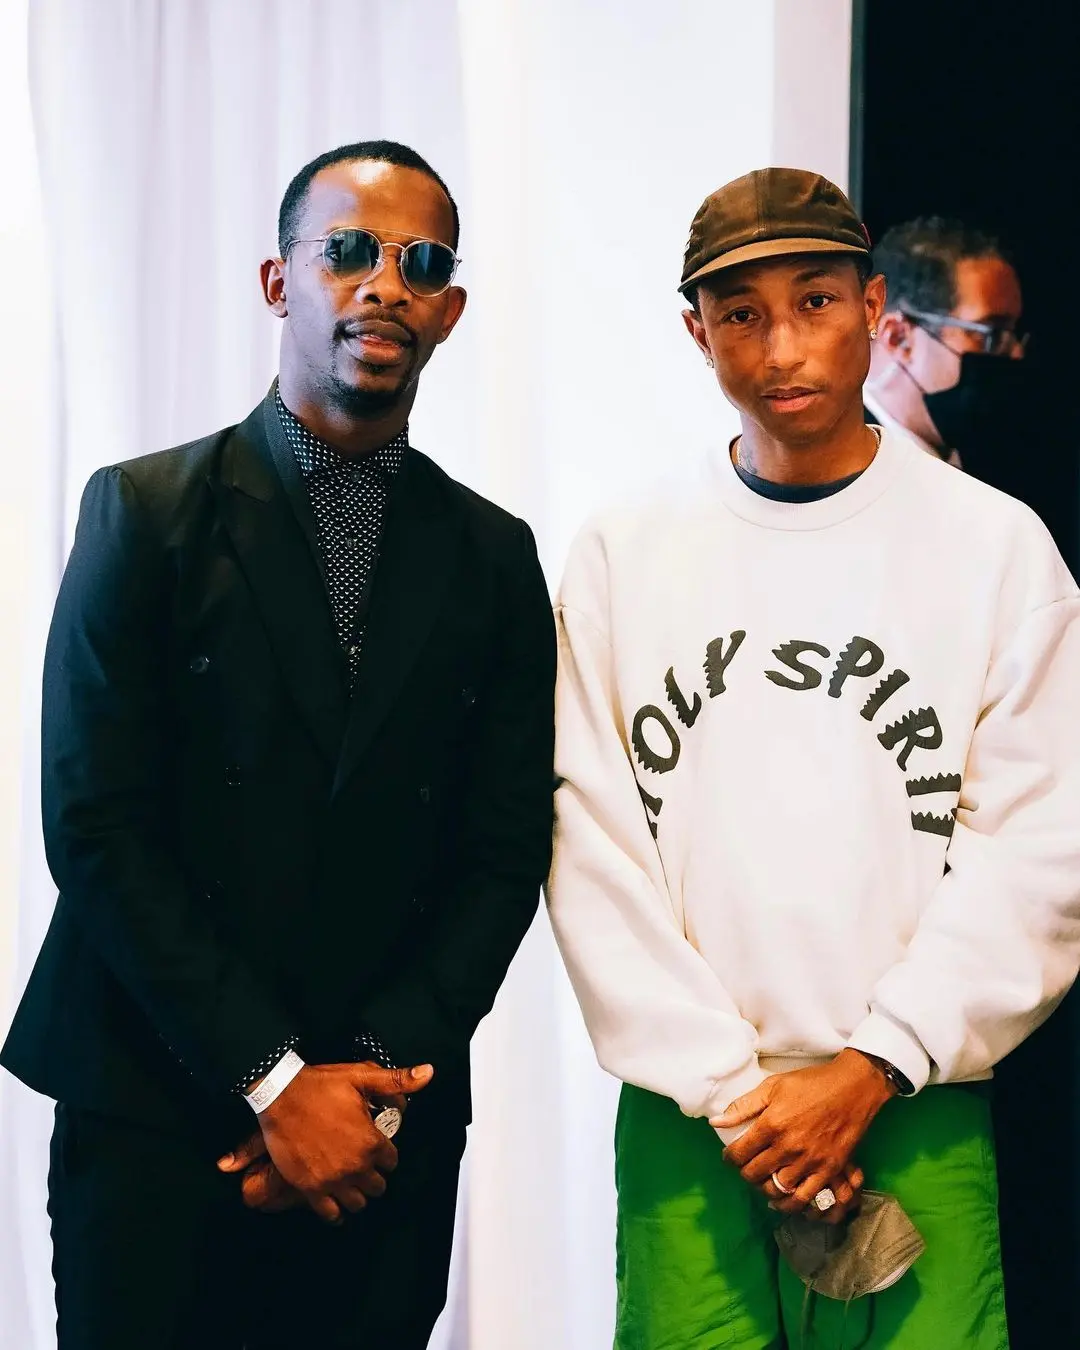 Zakes Bantwini hangs out with Pharrell Williams in New York